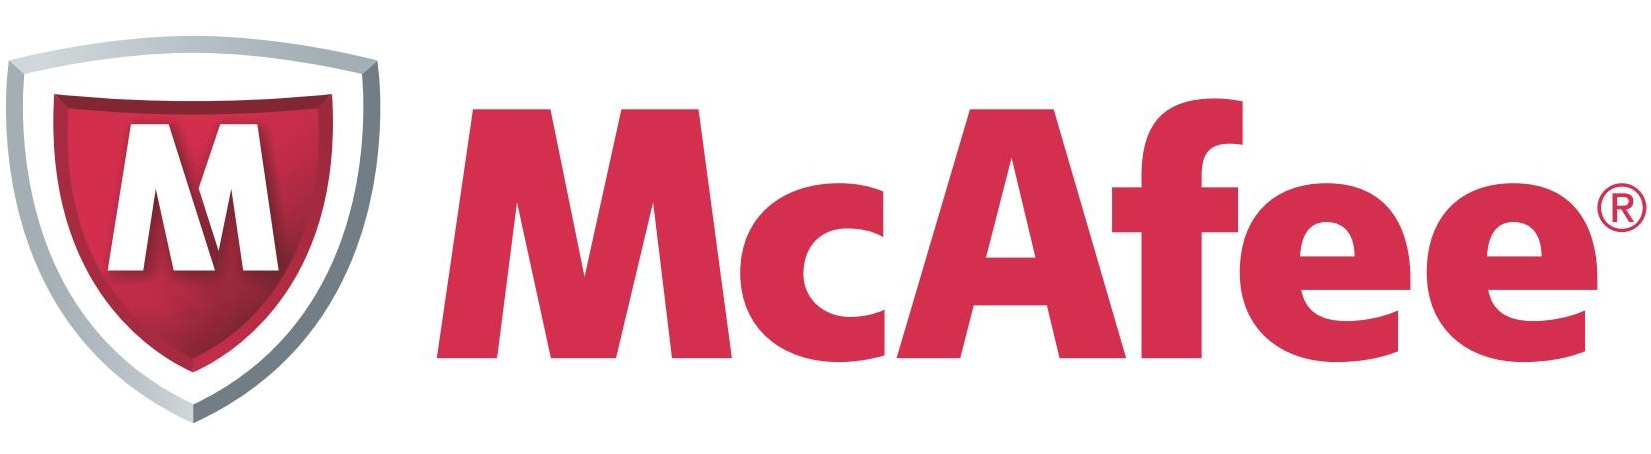 McAfee Gold Software Support & Advanced RMA Hardware Support - Extended Service - 1 Year - Service